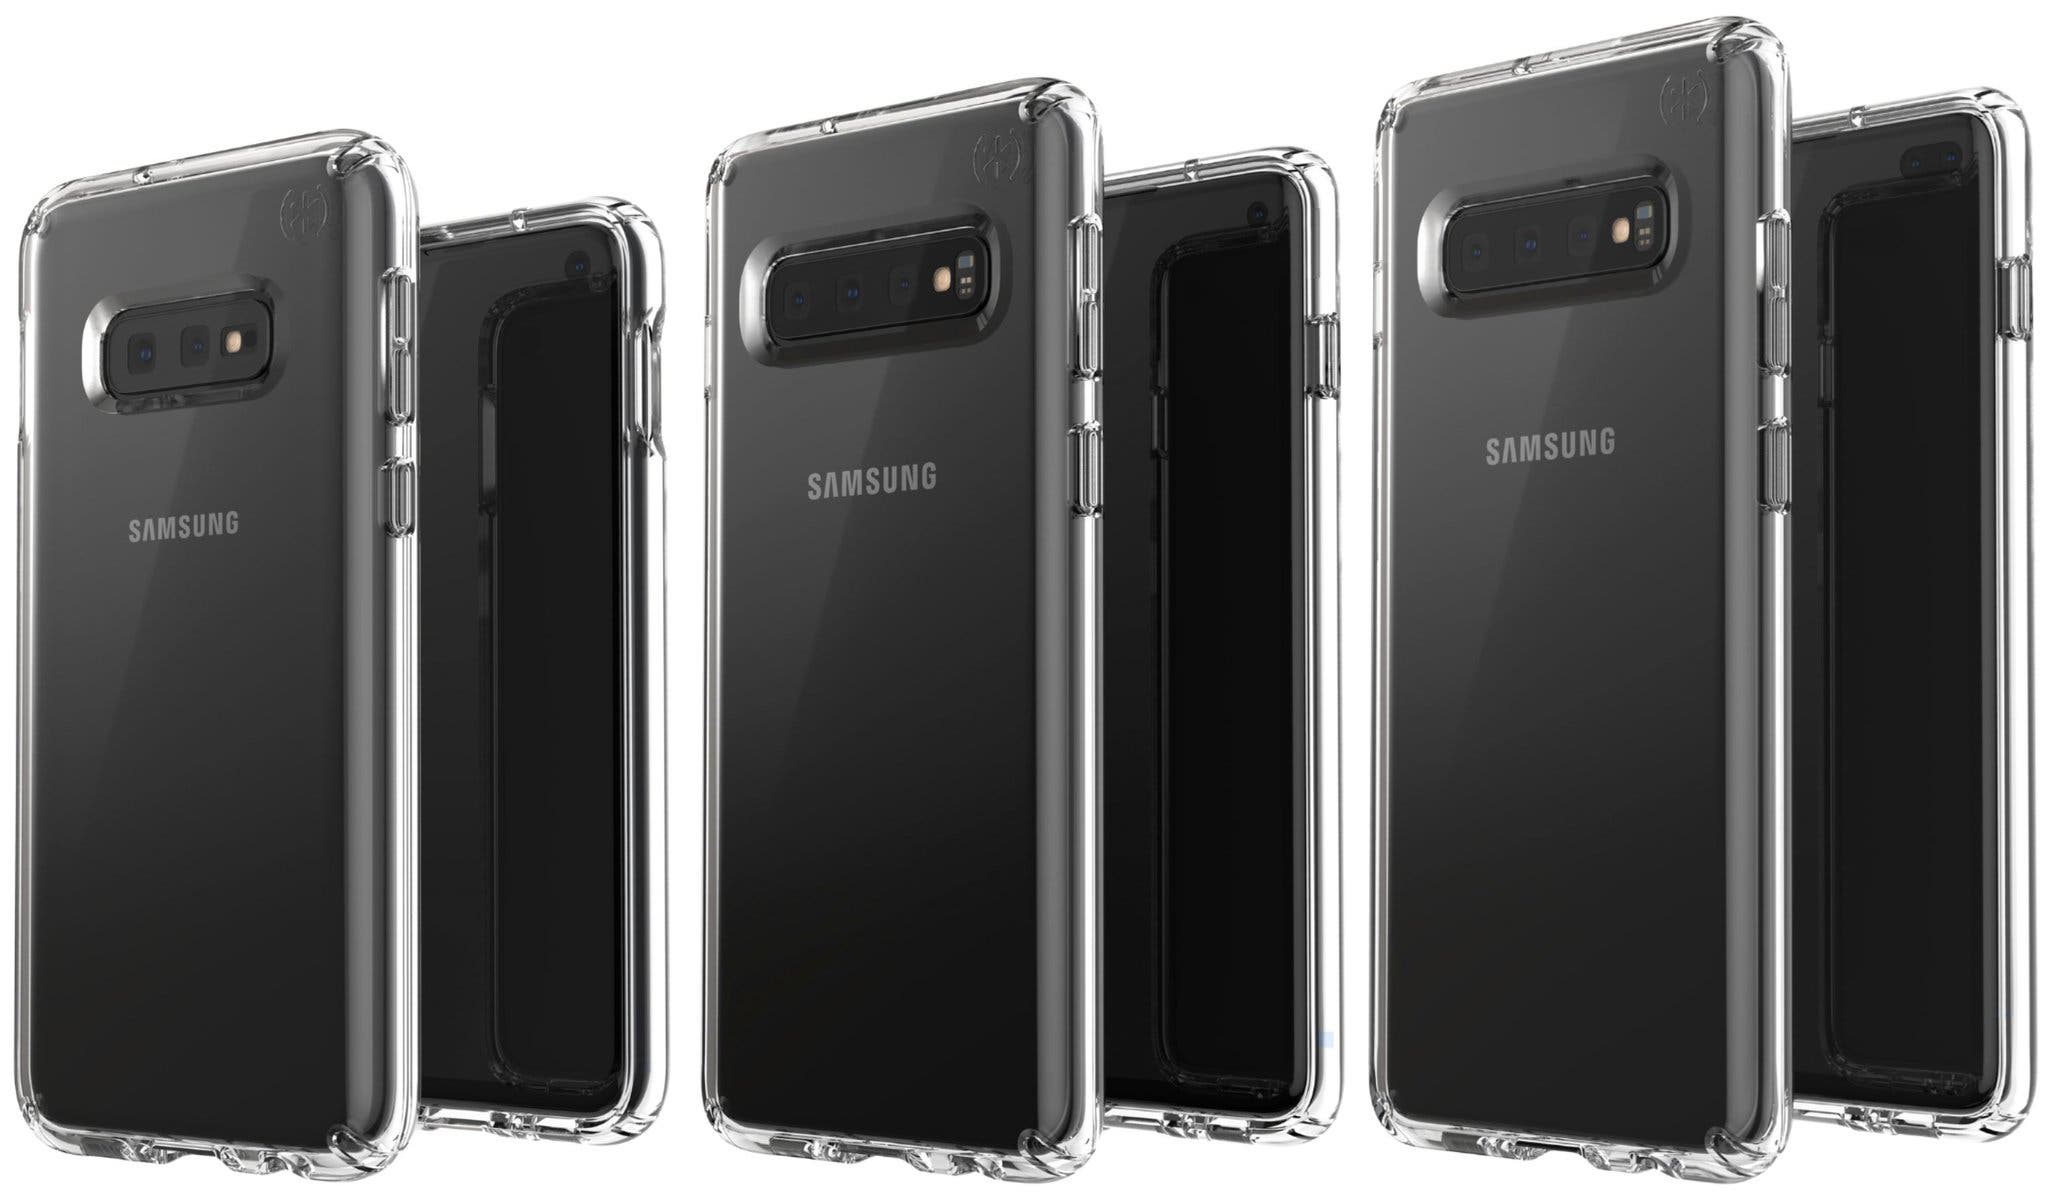 Samsung Galaxy S10E, S10 and S10+ Leaked in Renders